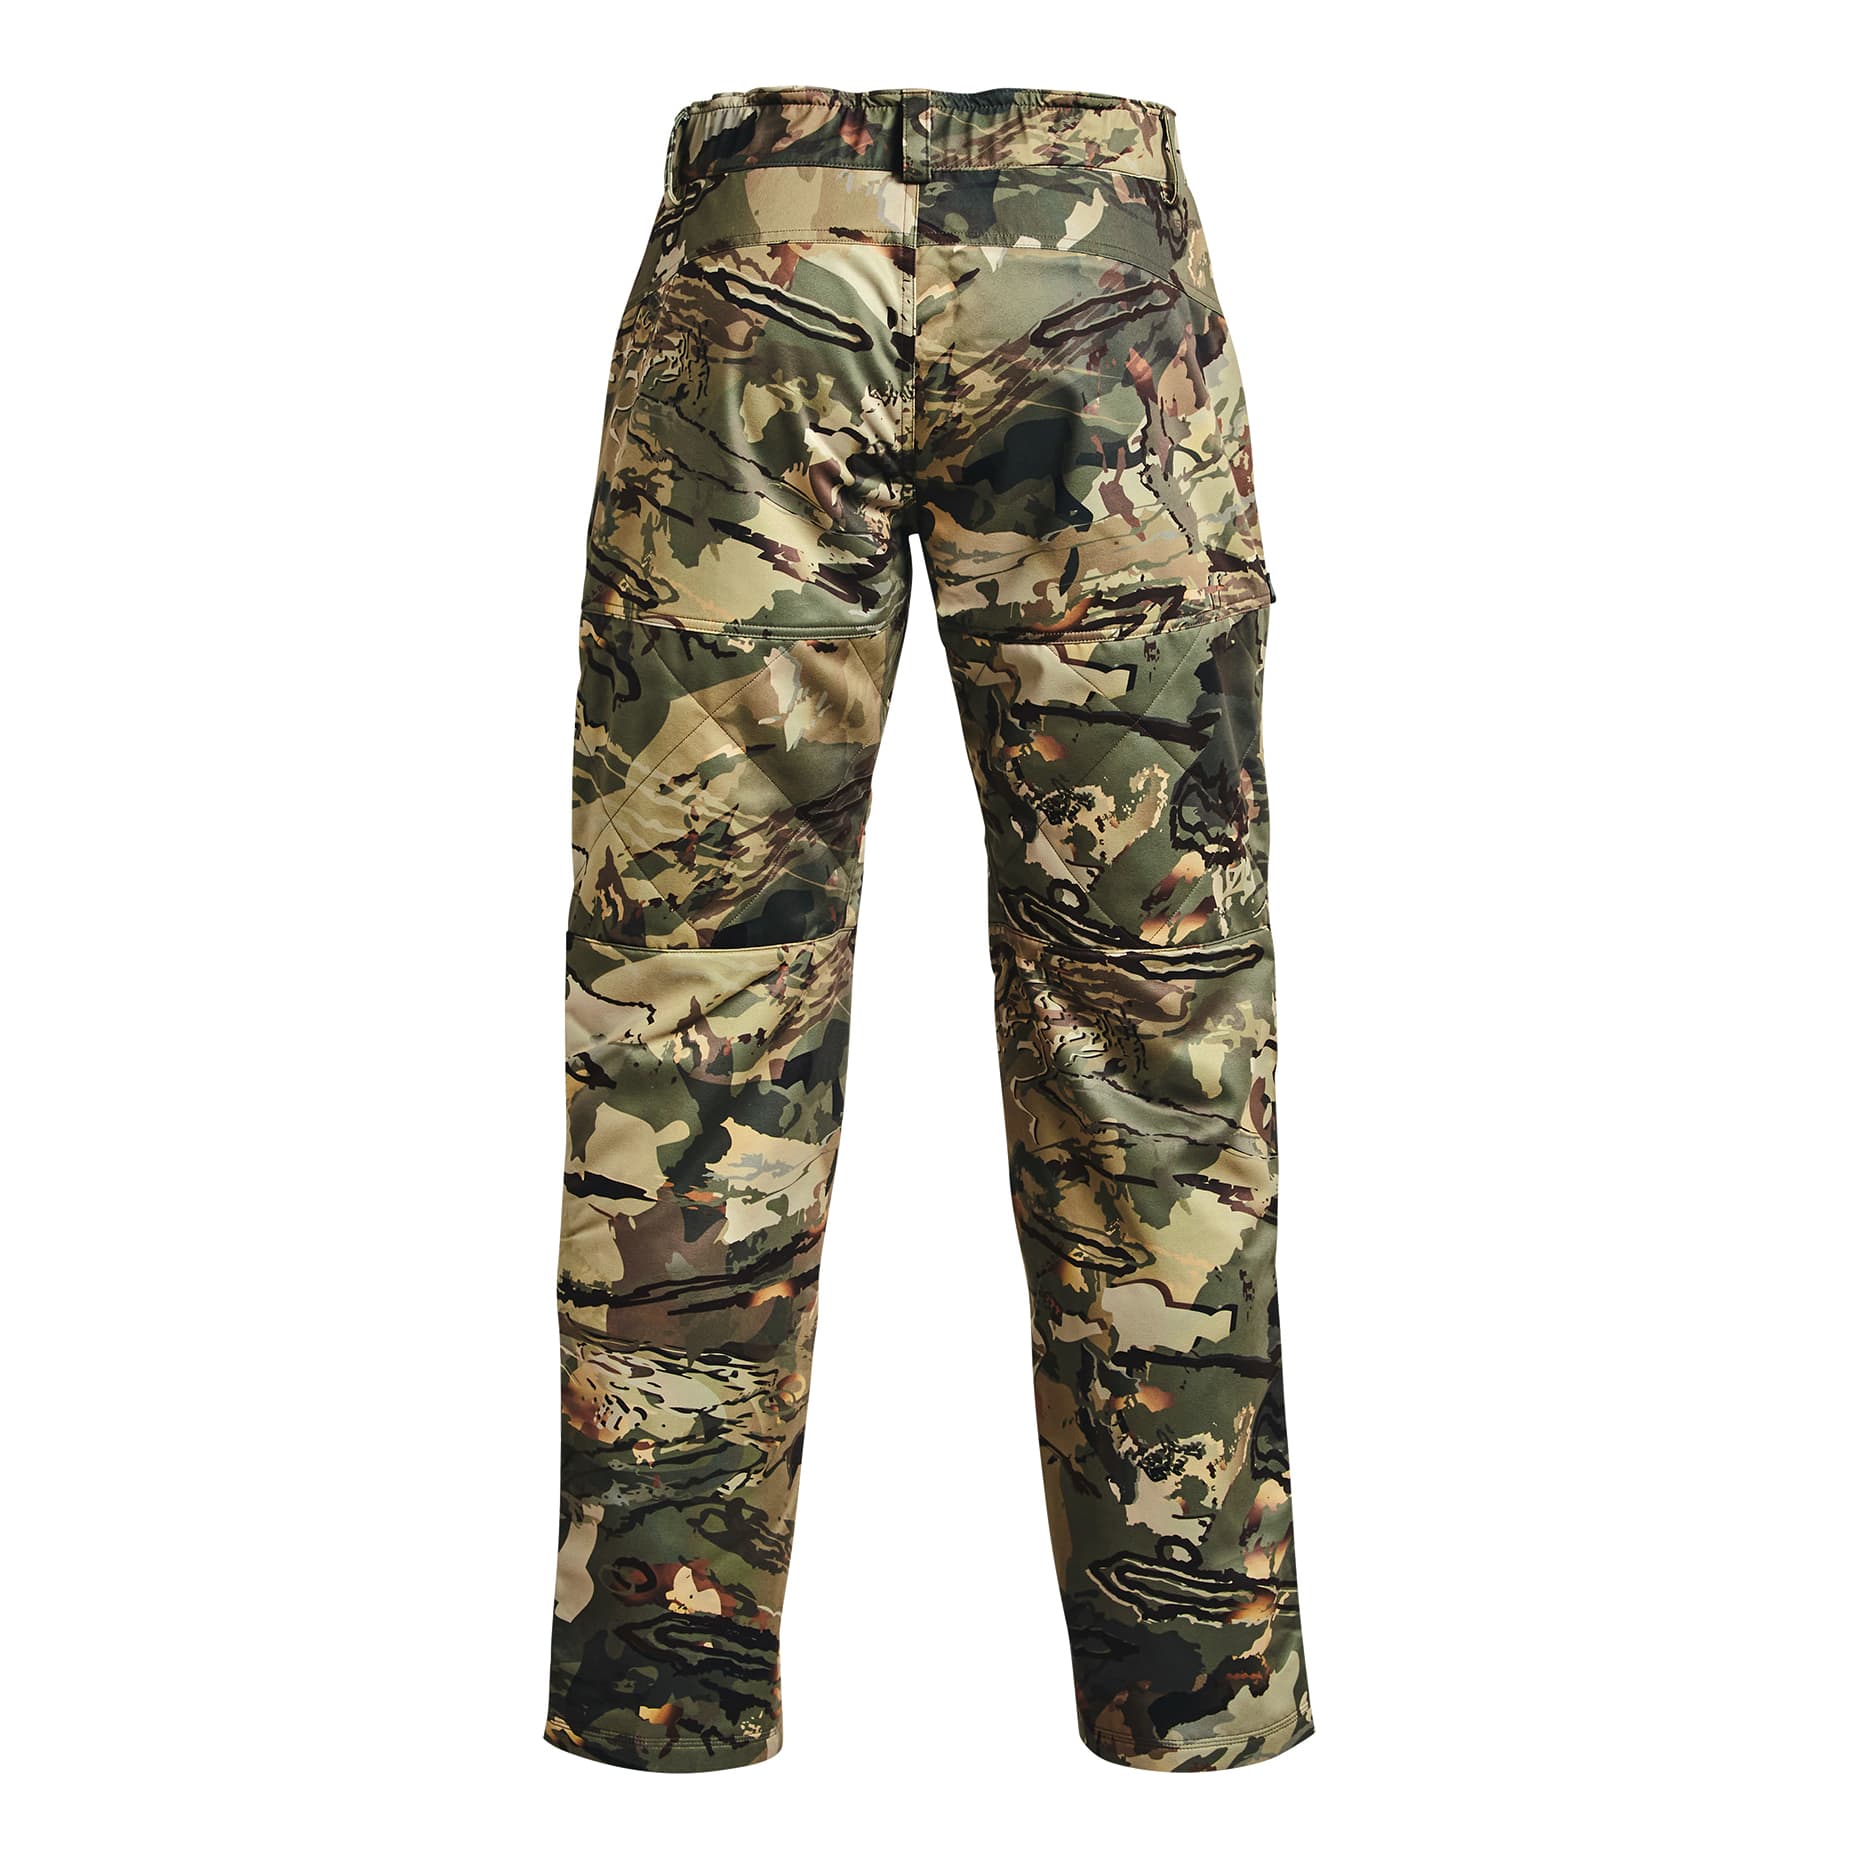 Under Armour Men's Tac Coldgear Infrared Leggings - Emergency Responder  Products